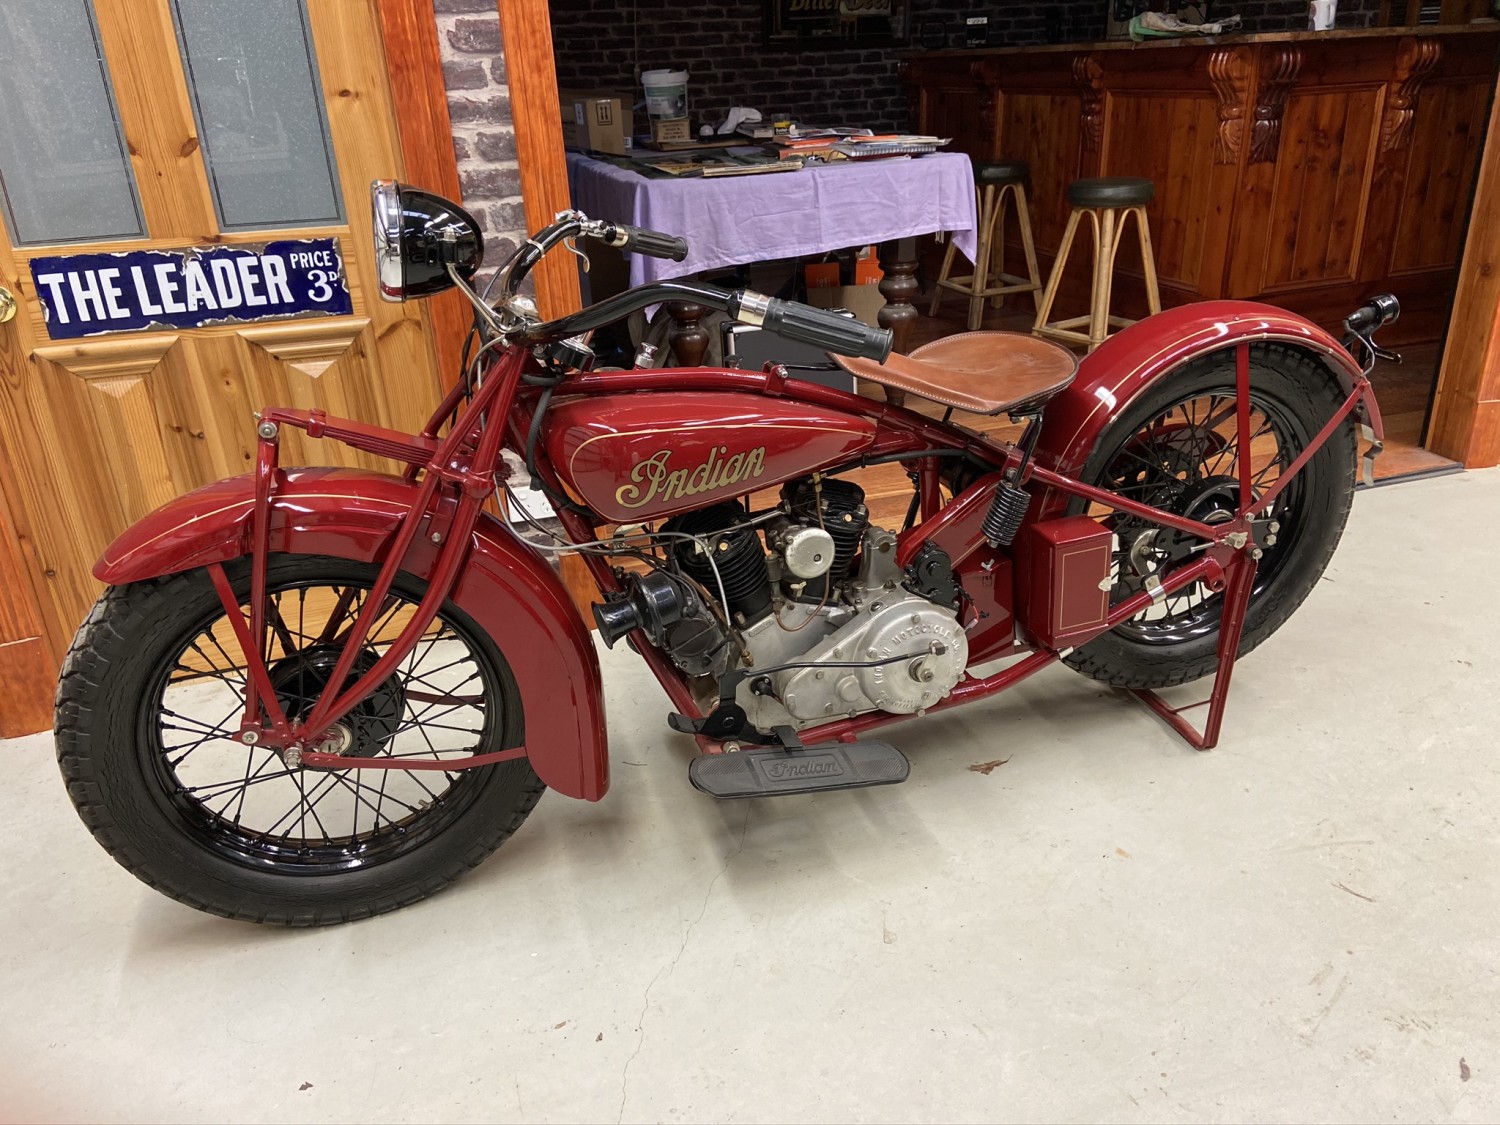 1928 Indian 101 scout